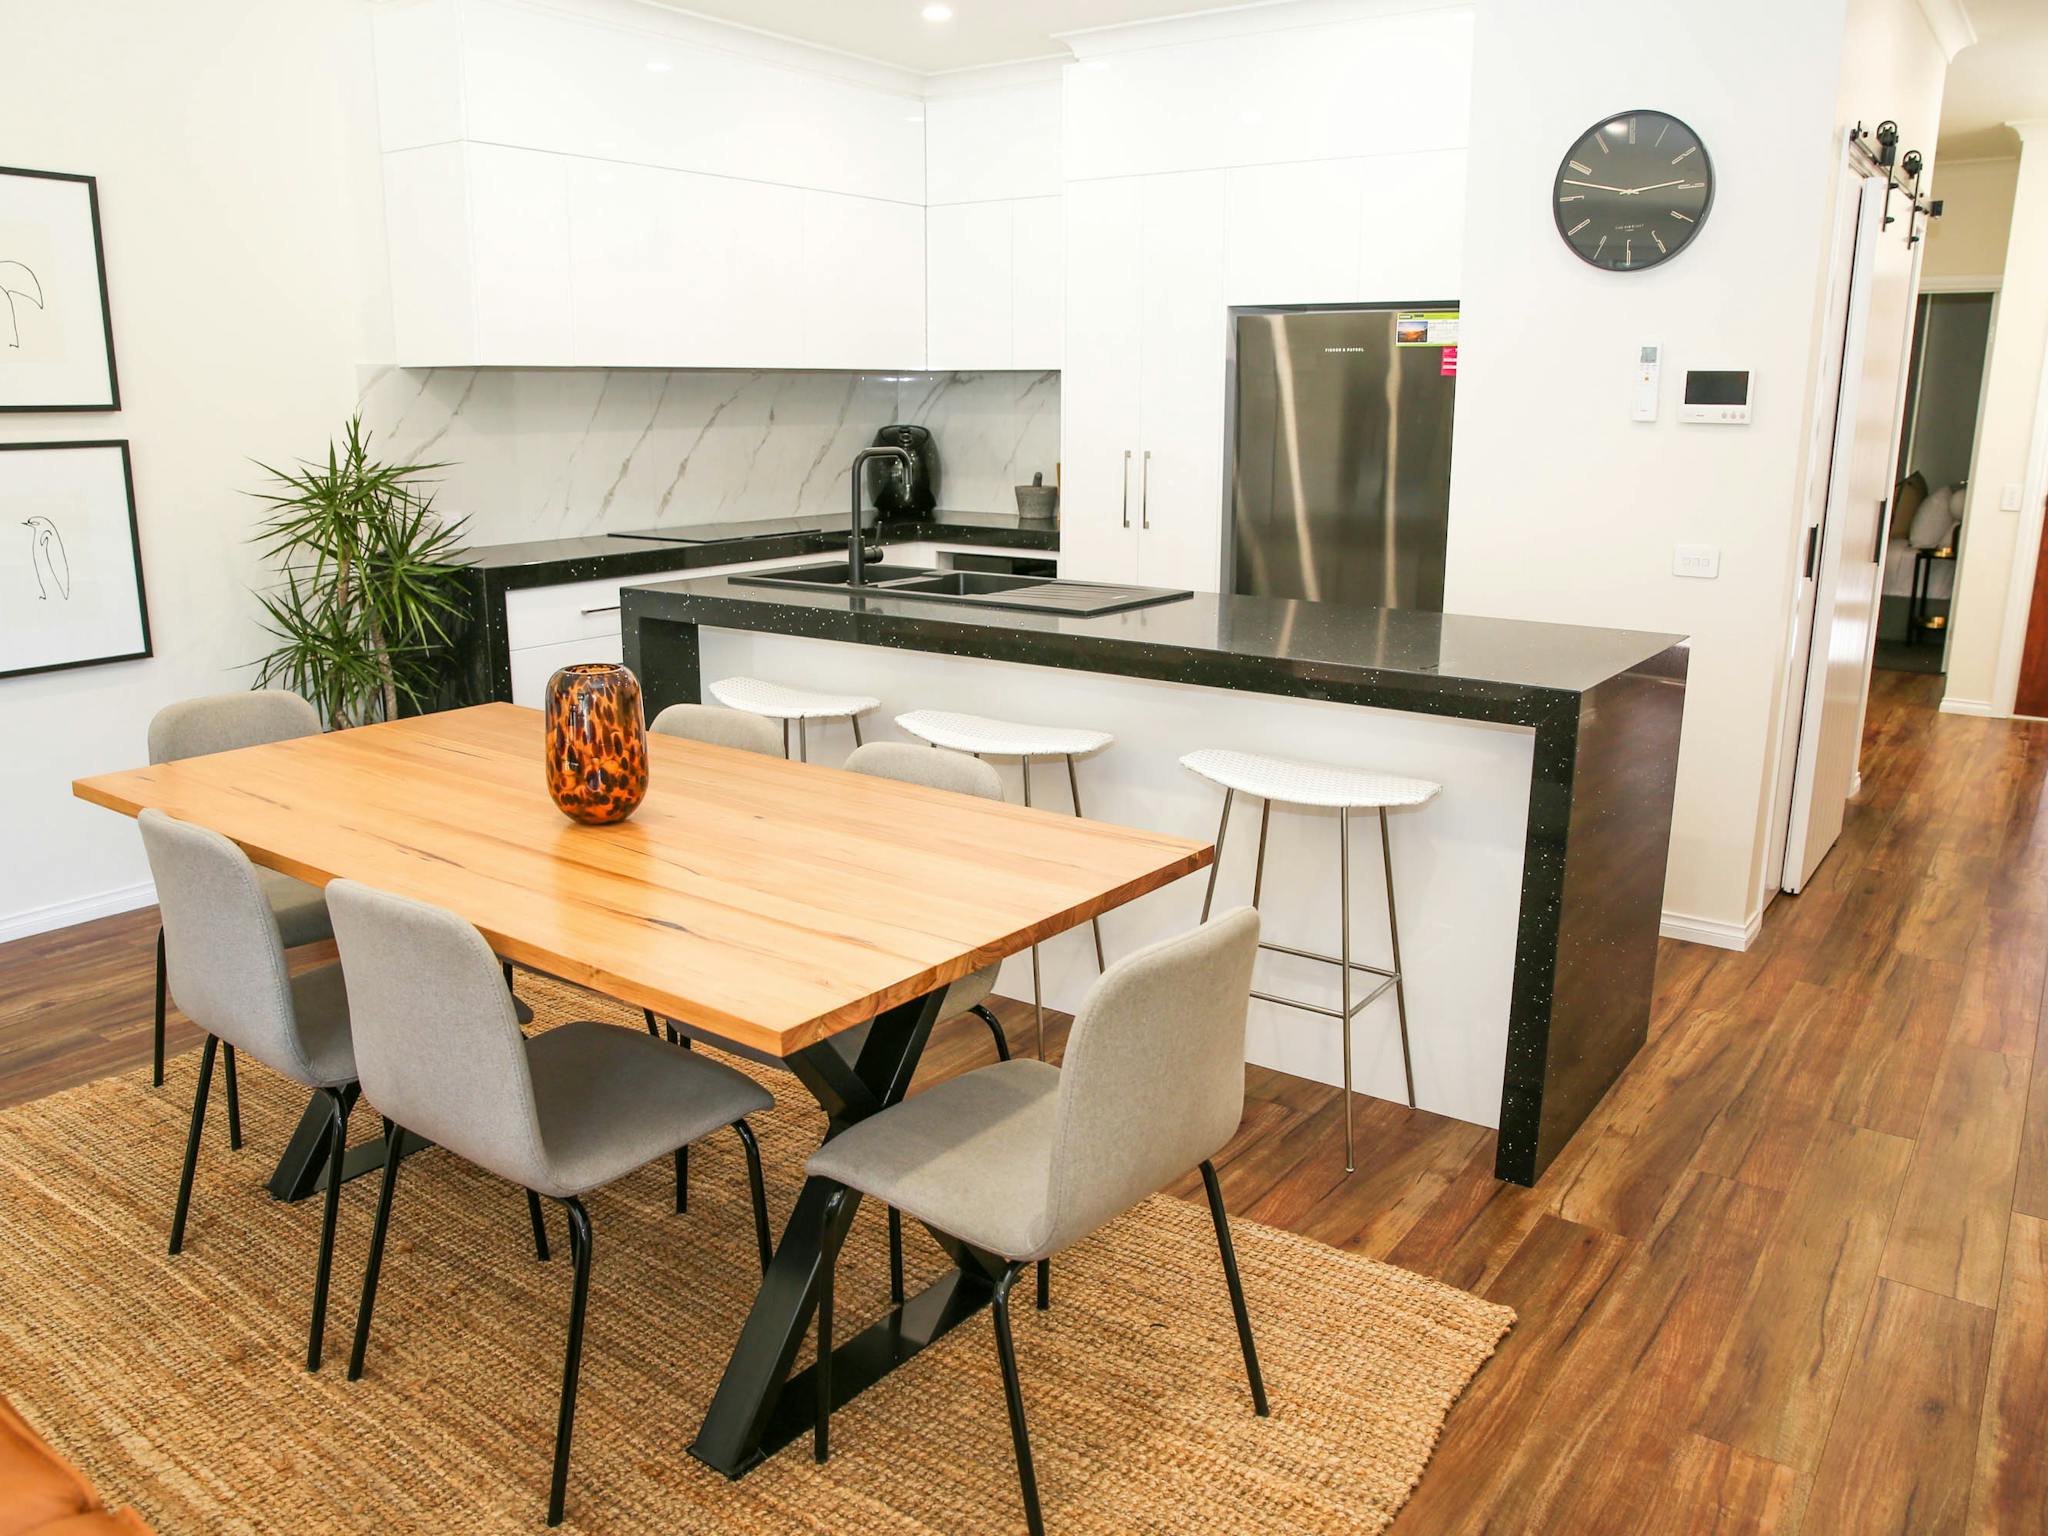 Hidden Gem Kitchen and six-seat dining table